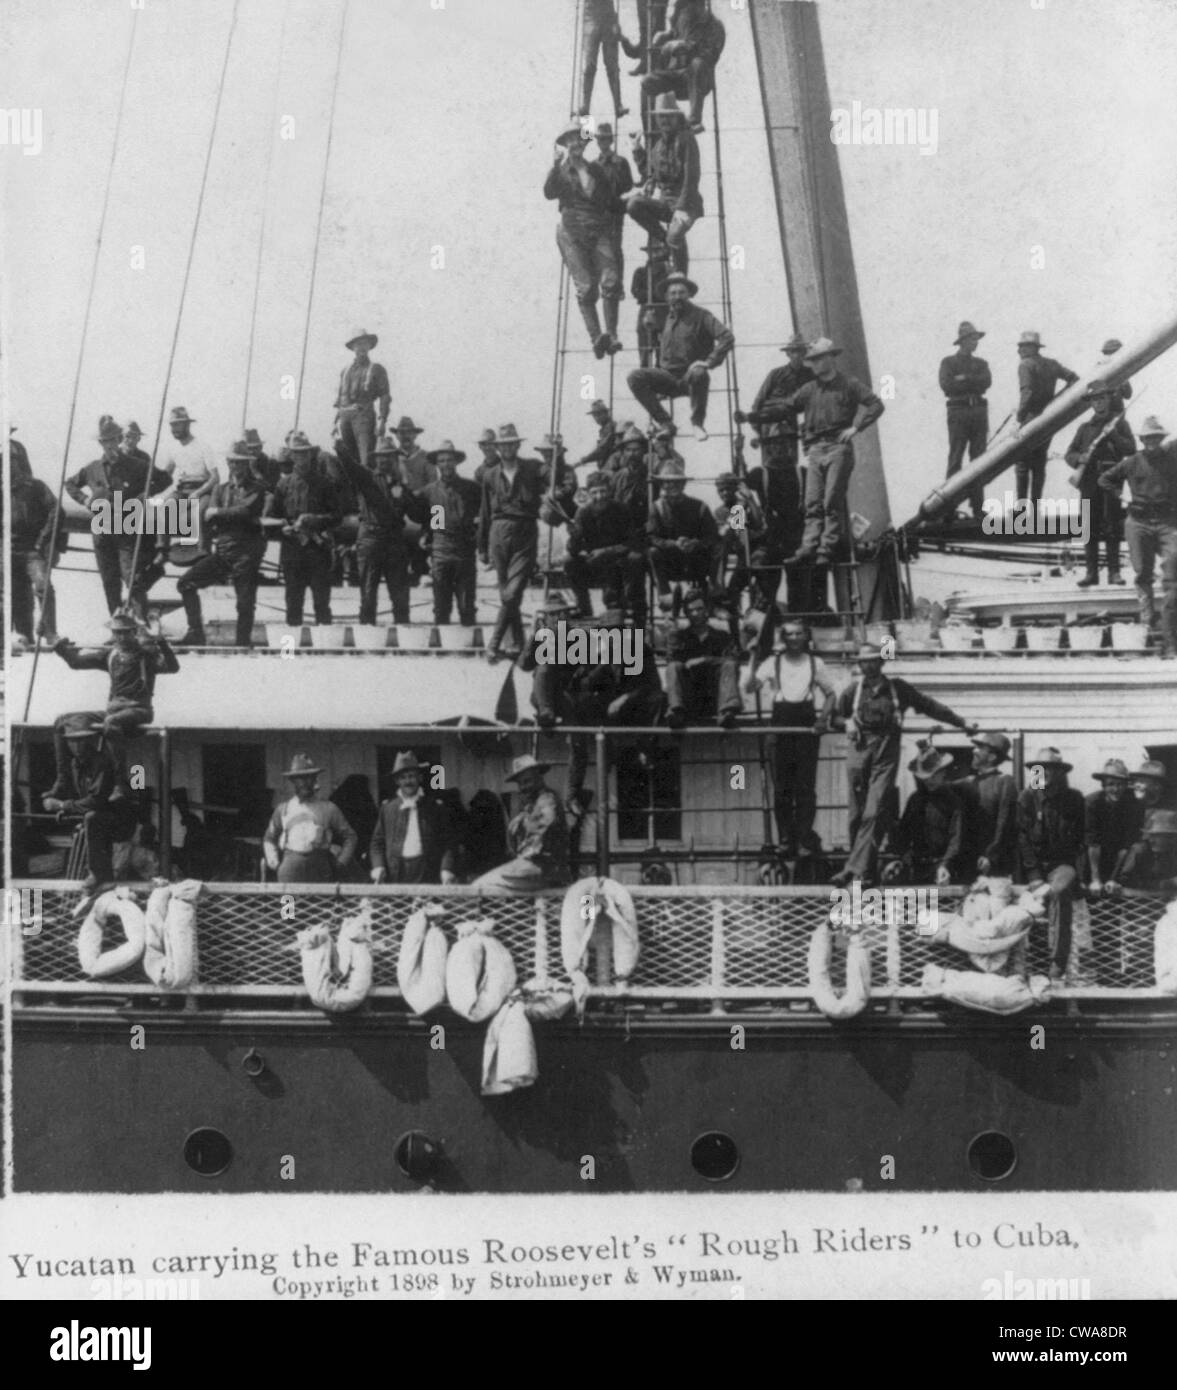 During the Spanish American War, the ship, the USS YUCATAN, carries   Roosevelt's 'Rough Riders' to Cuba. Men line decks and Stock Photo